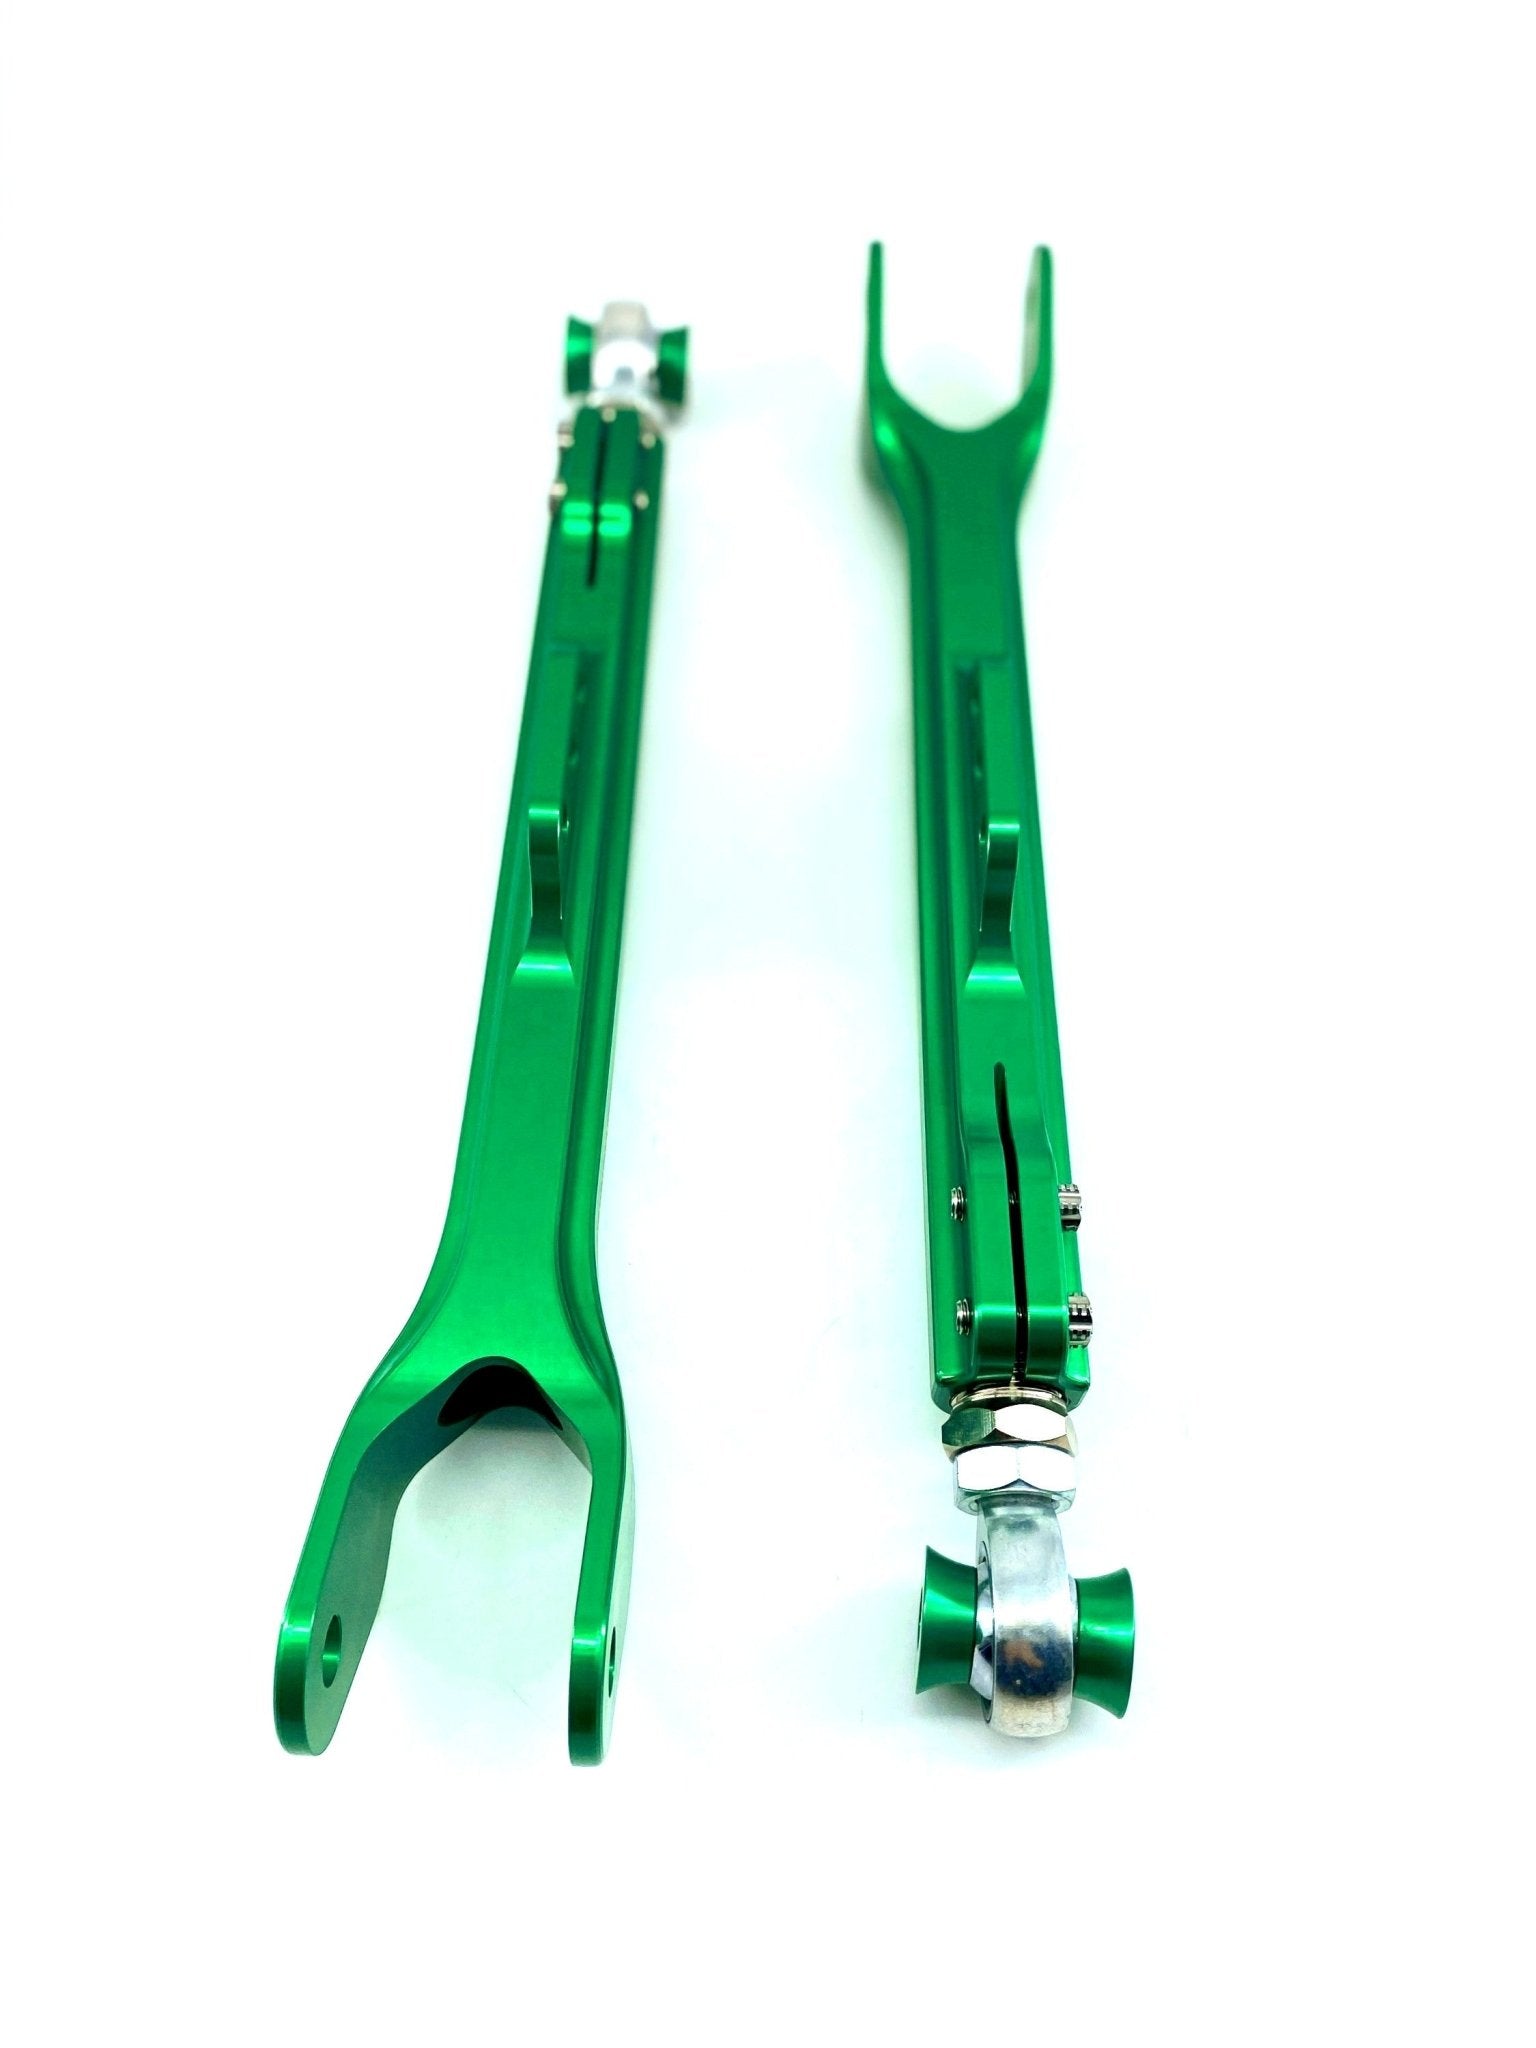 Chaser / Mark II / Cresta JZX90 / JZX100 Serial999 Rear Lower Control Arms